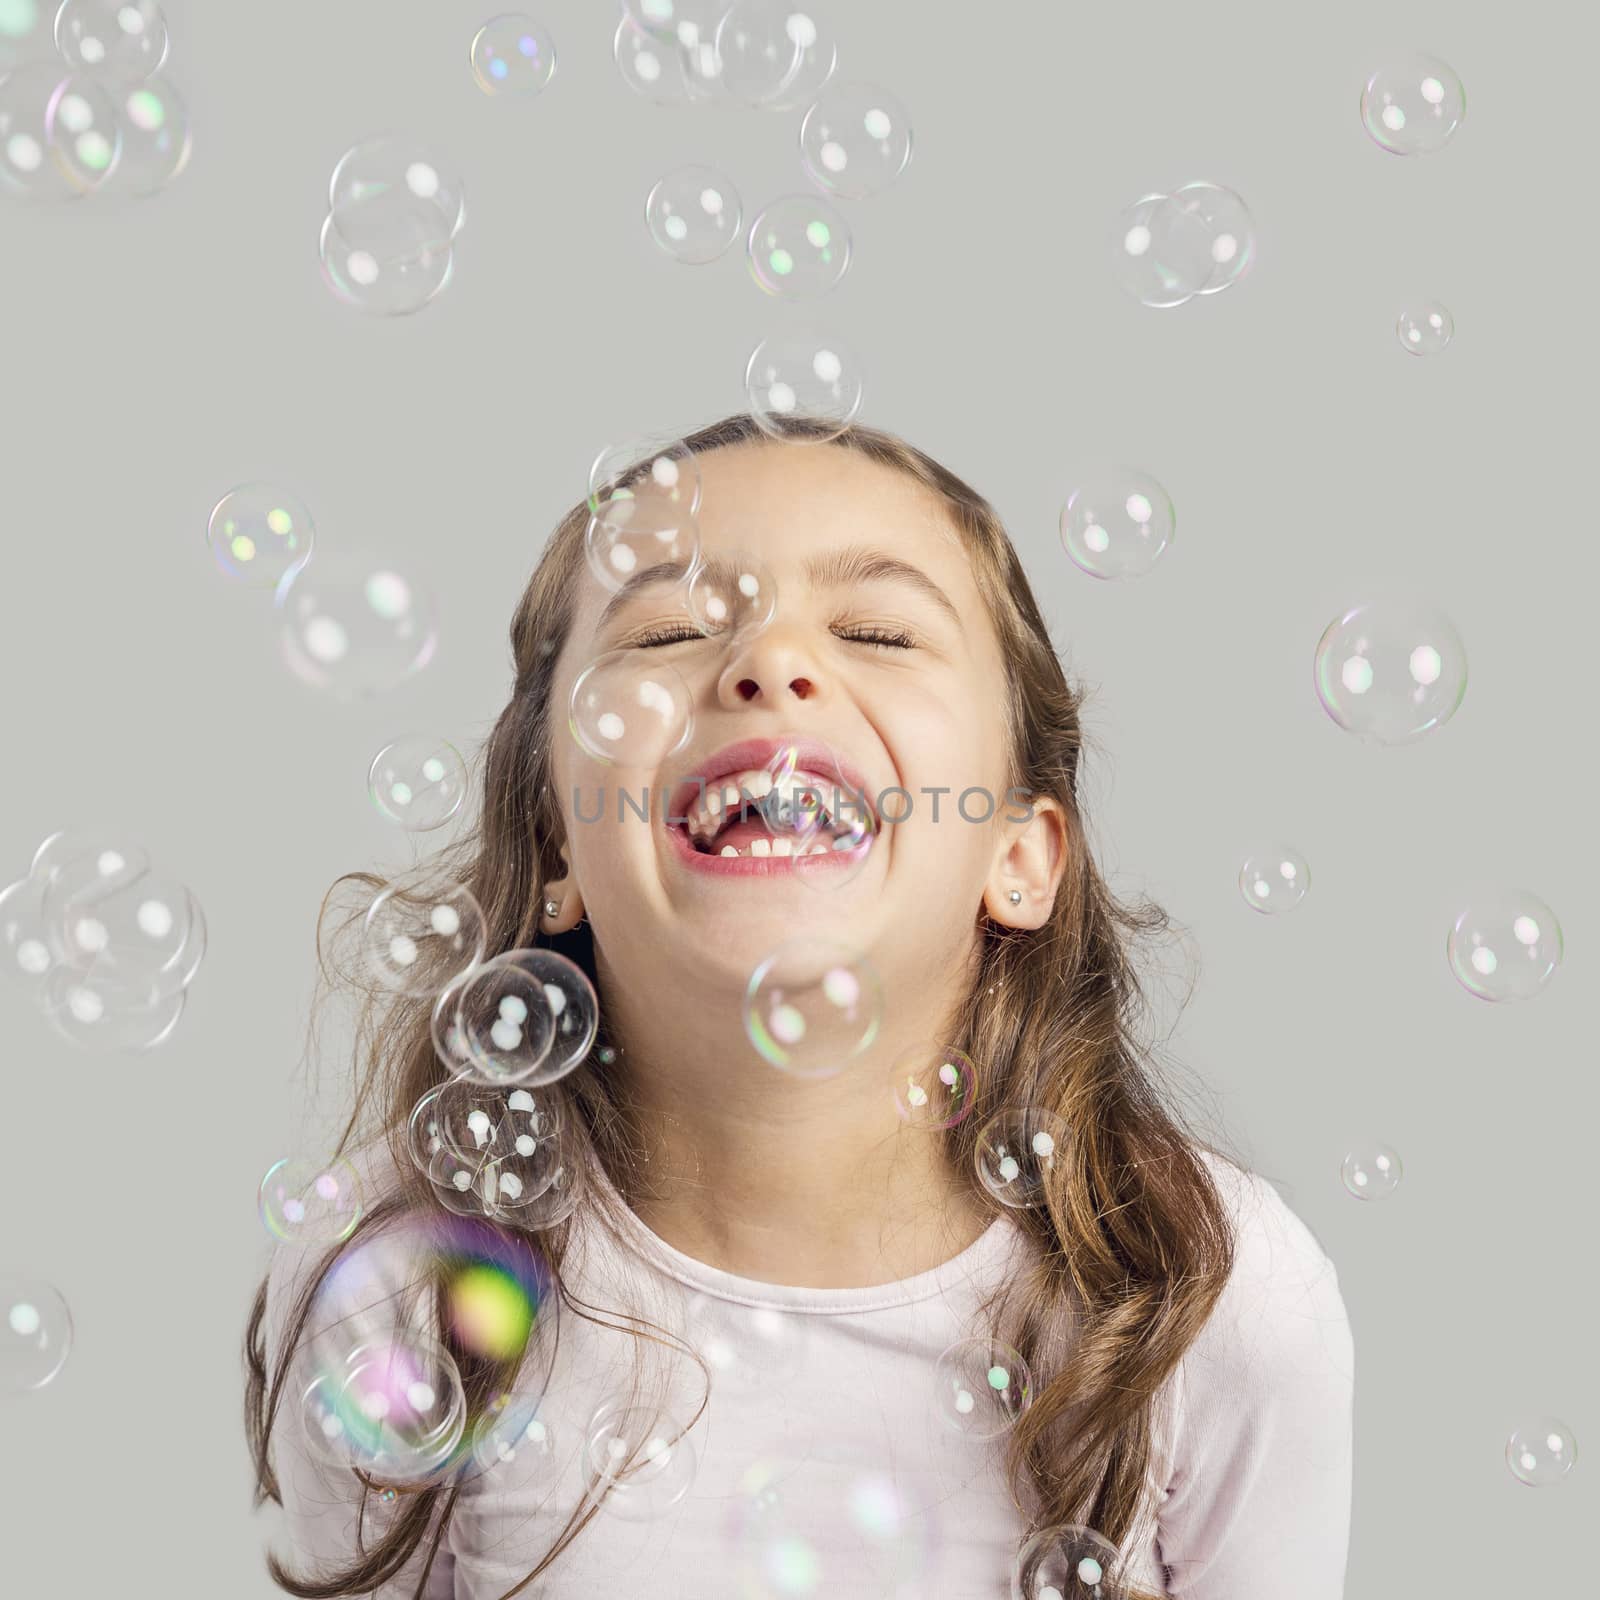 Girl playing with soap bubbles by Iko